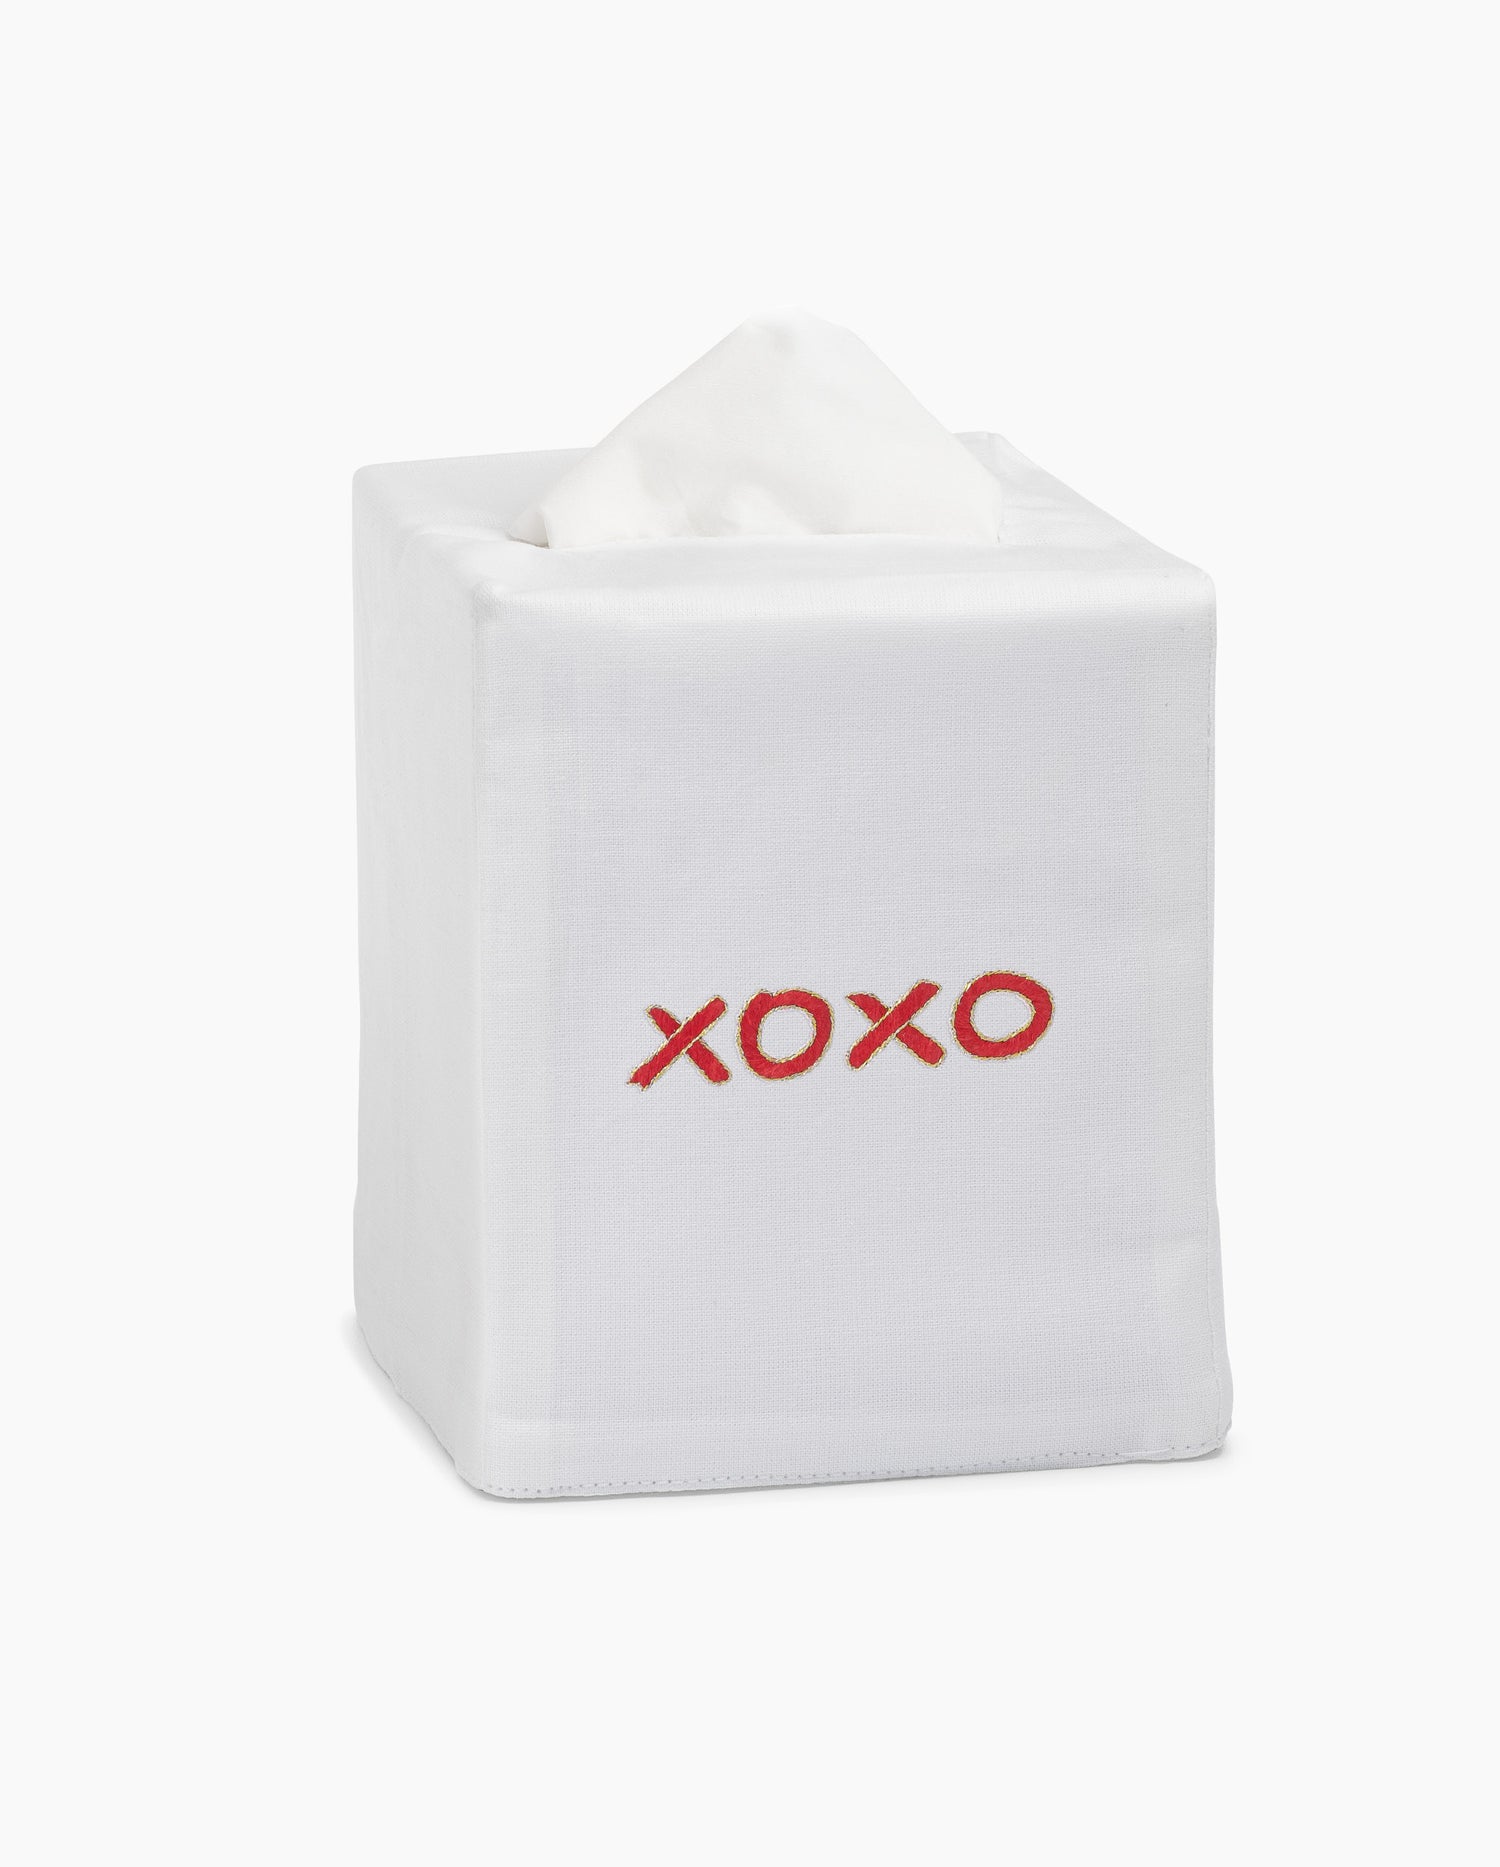 A XOXO Tissue Box Cover from Henry Handwork with the word xoxo on it.